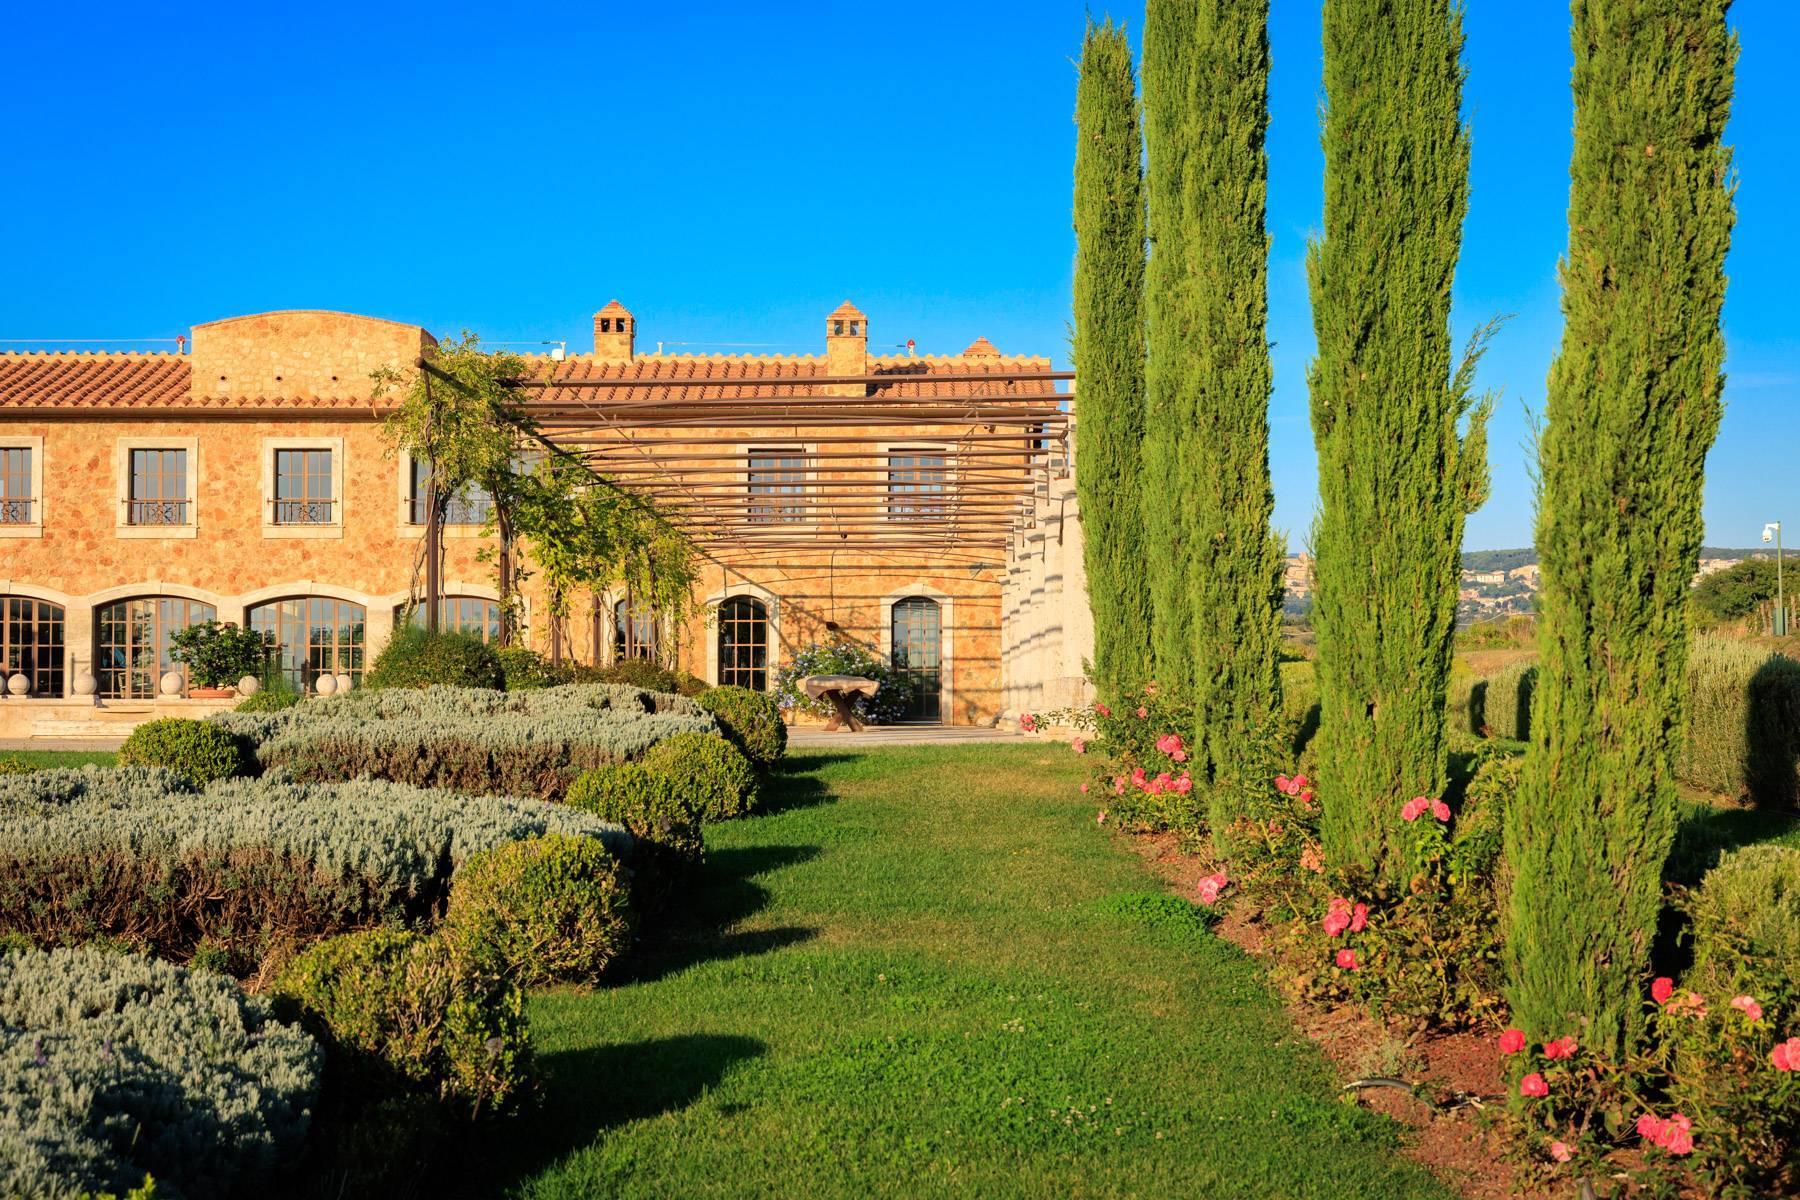 Incomparable Estate in the Tuscan countryside